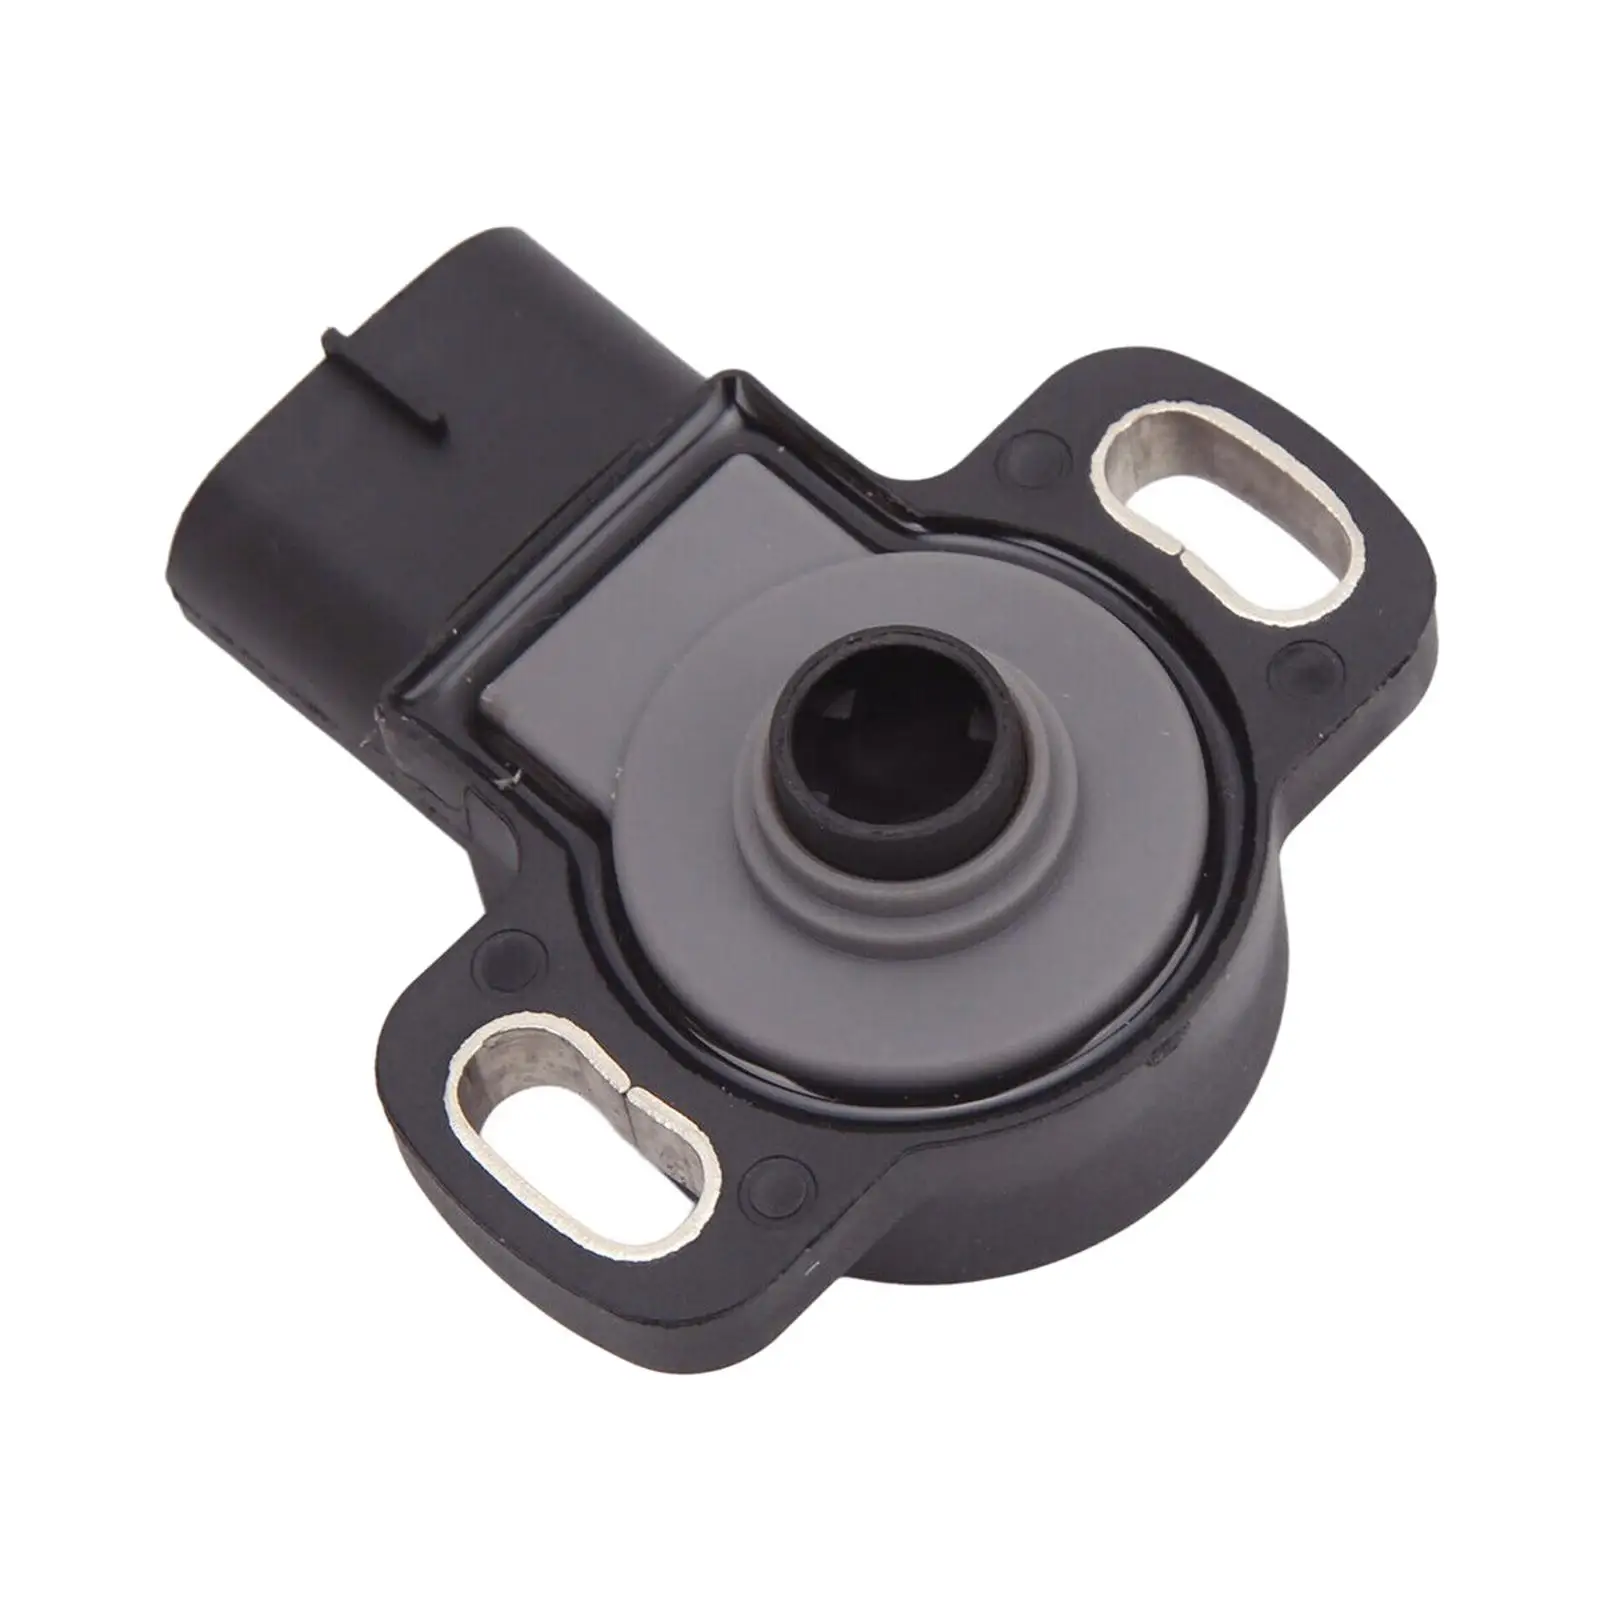 Durable Throttle Position Sensor Assembly Replacement Car High Strength 13550-13D60 for Suzuki V-Strom DL650 2004-2006